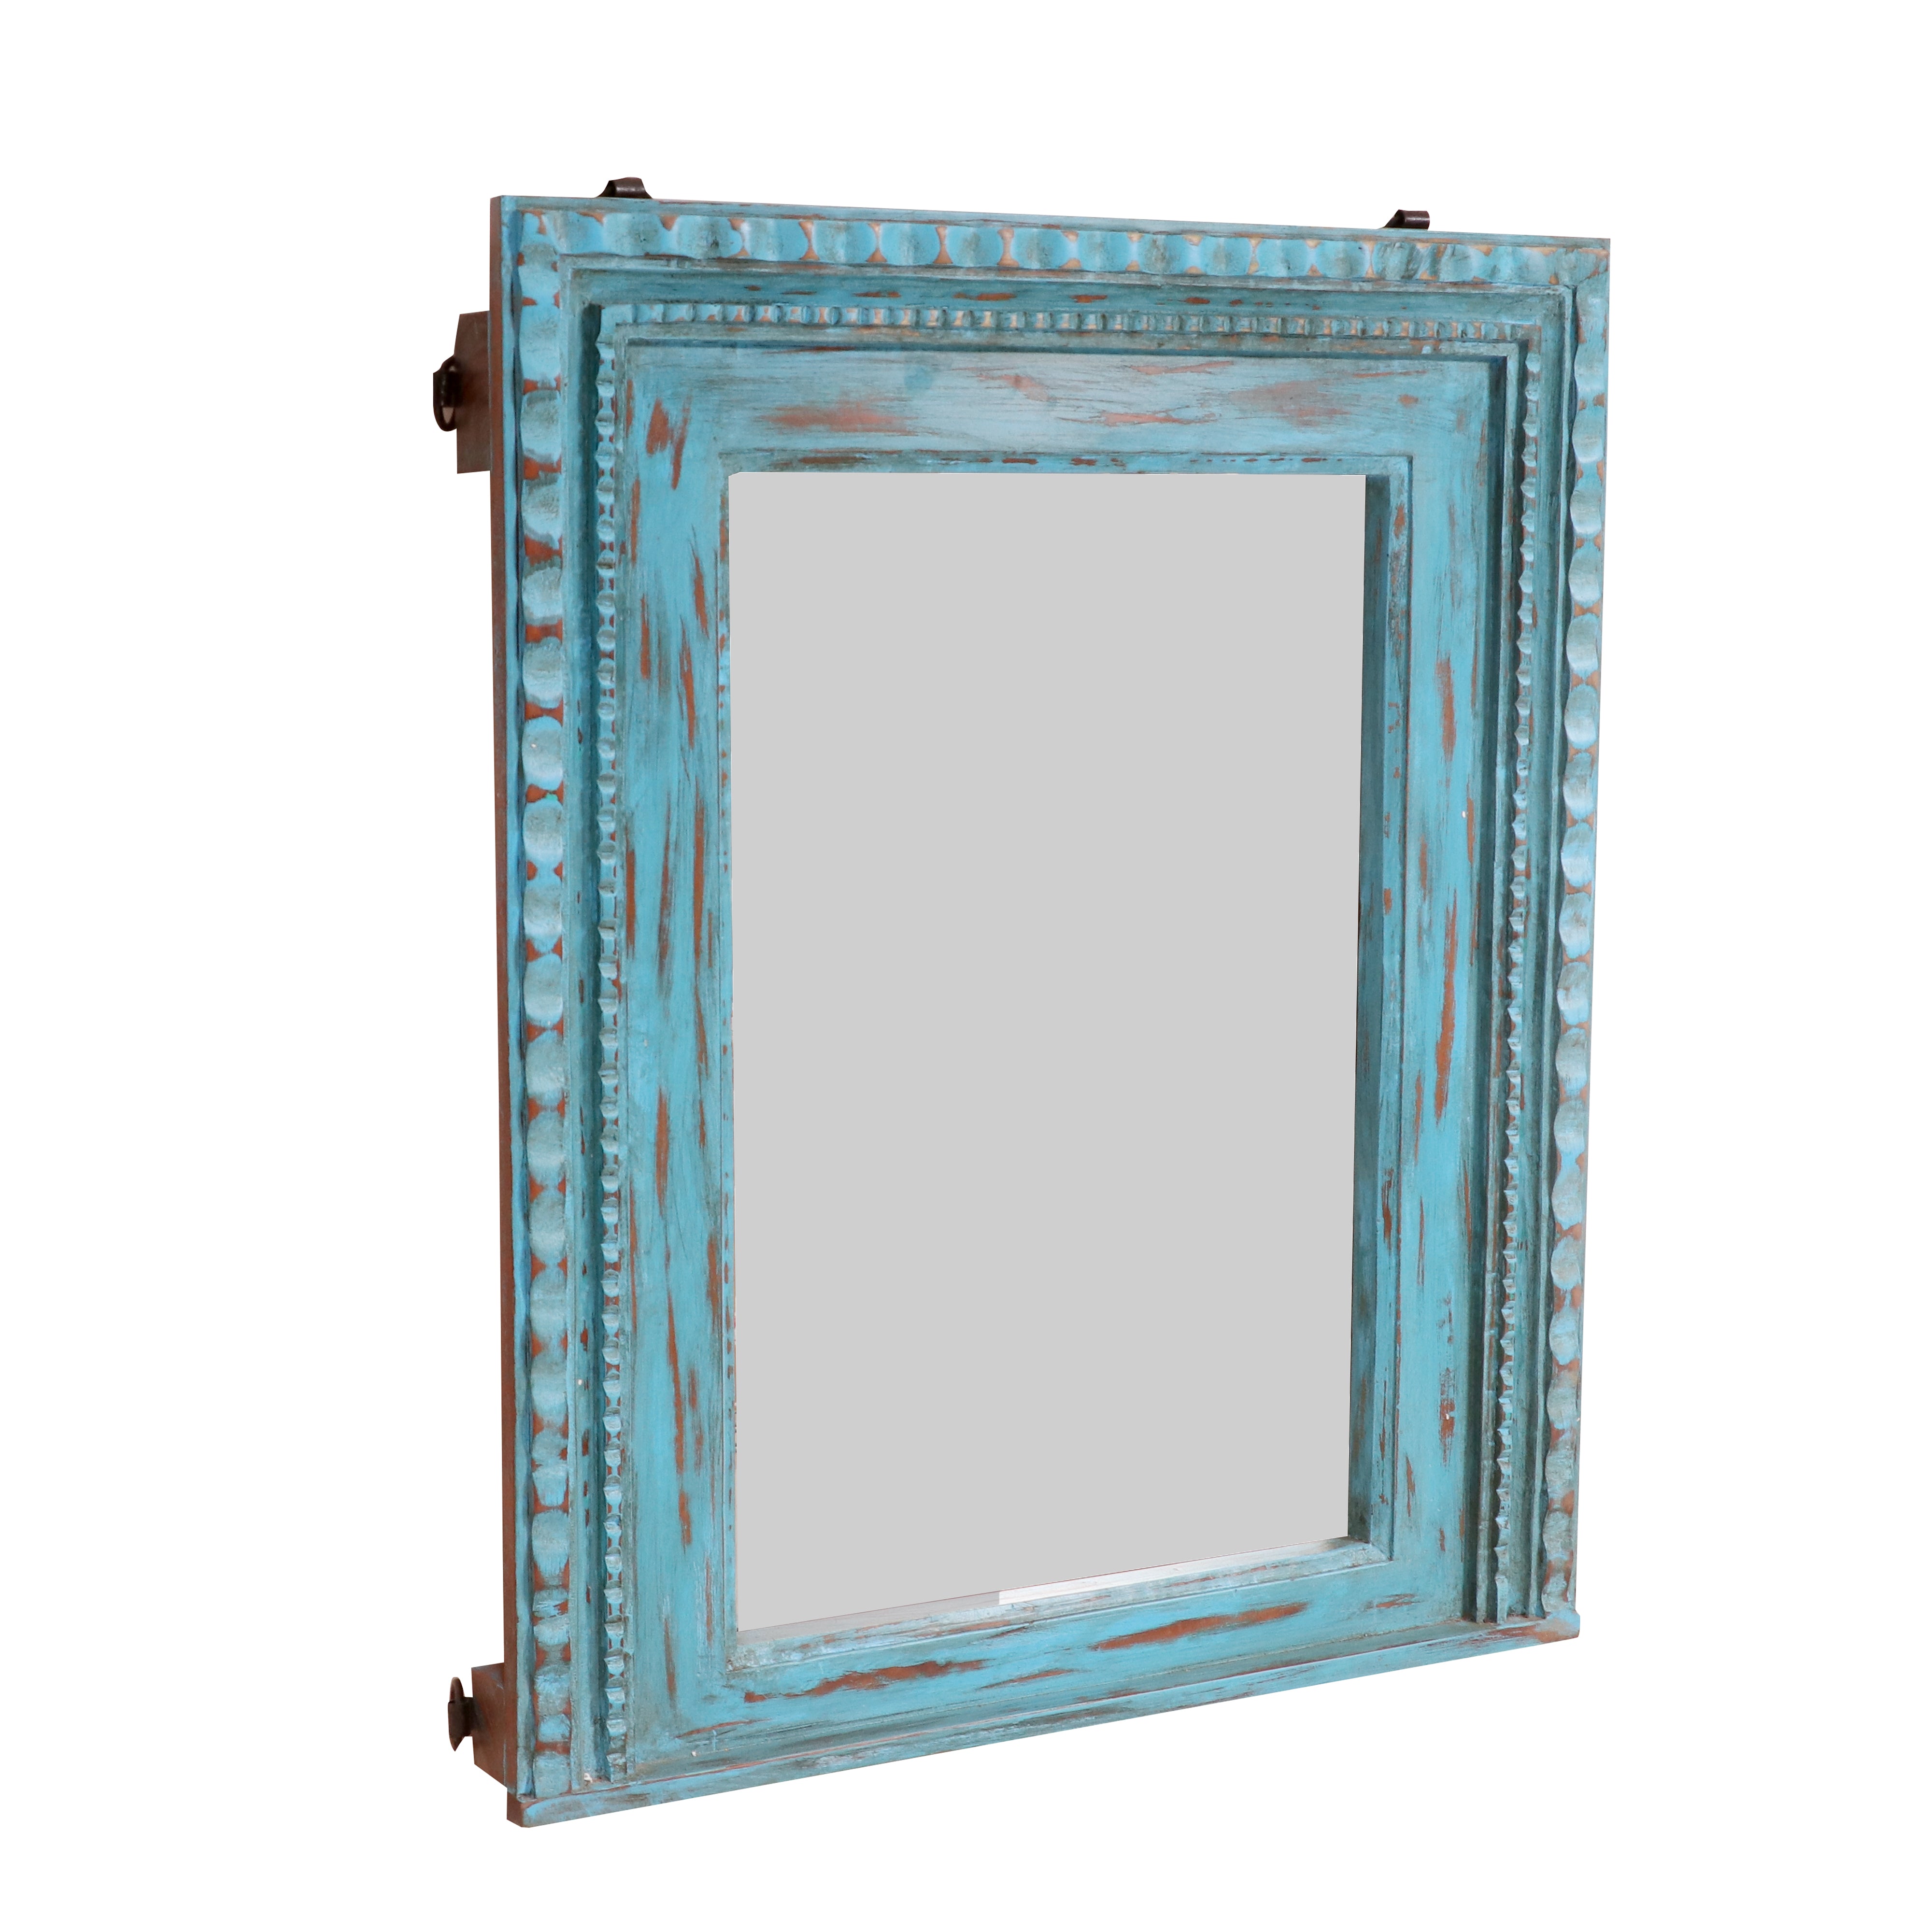 Blue folk beads traditional hand carved solid wooden mirror Mirror